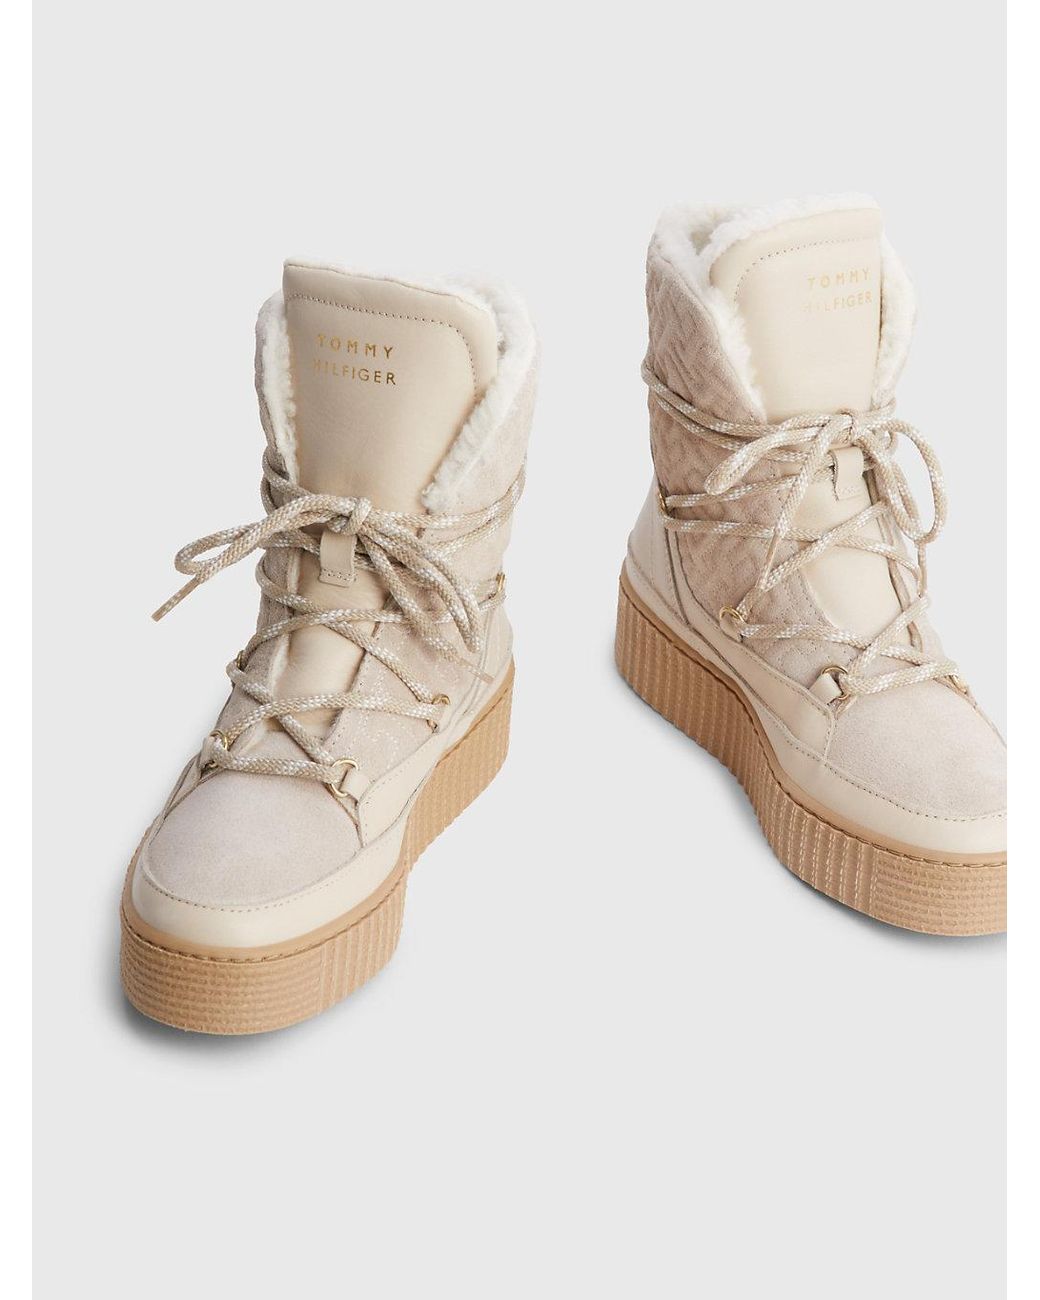 Tommy Hilfiger Monogram Lace-up Snow Boots in Natural | Lyst UK